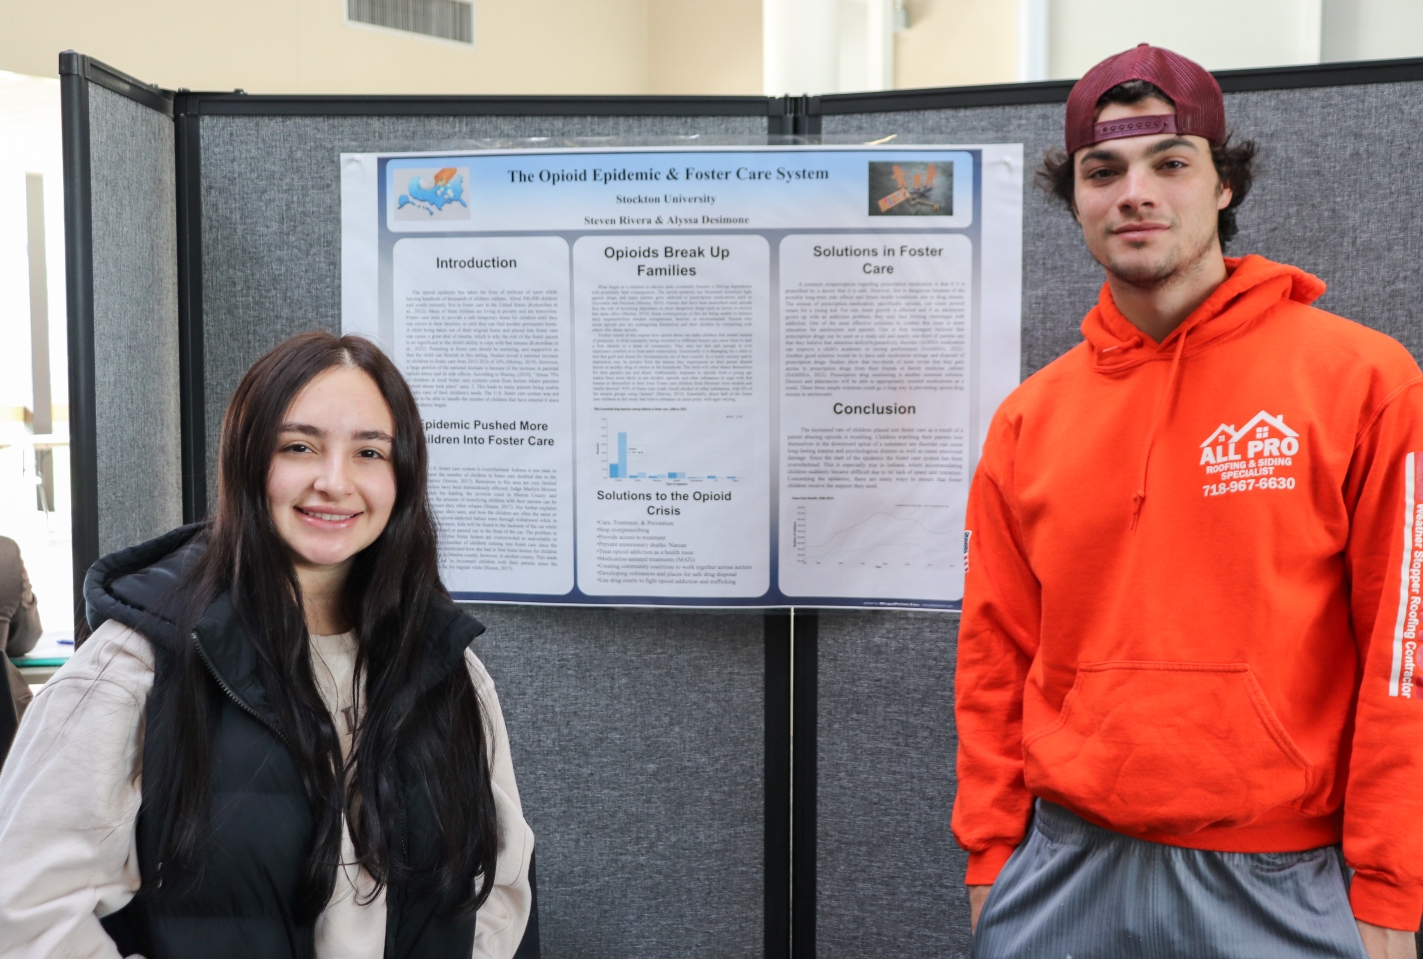 Alyssa Desimone and Steven Rivera stand in front of their project poster.